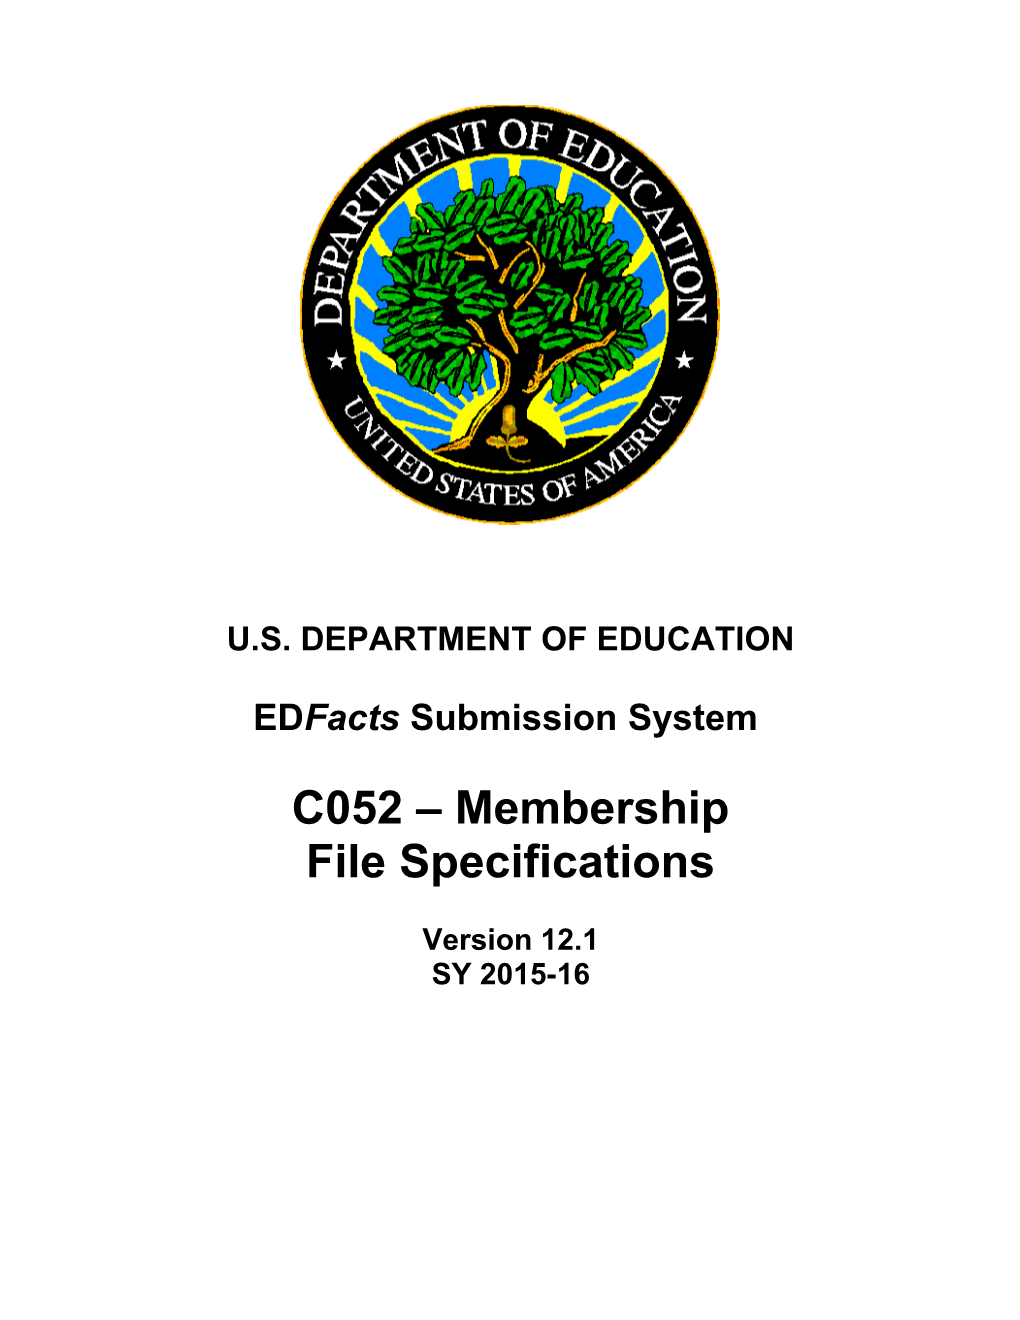 Membership File Specifications